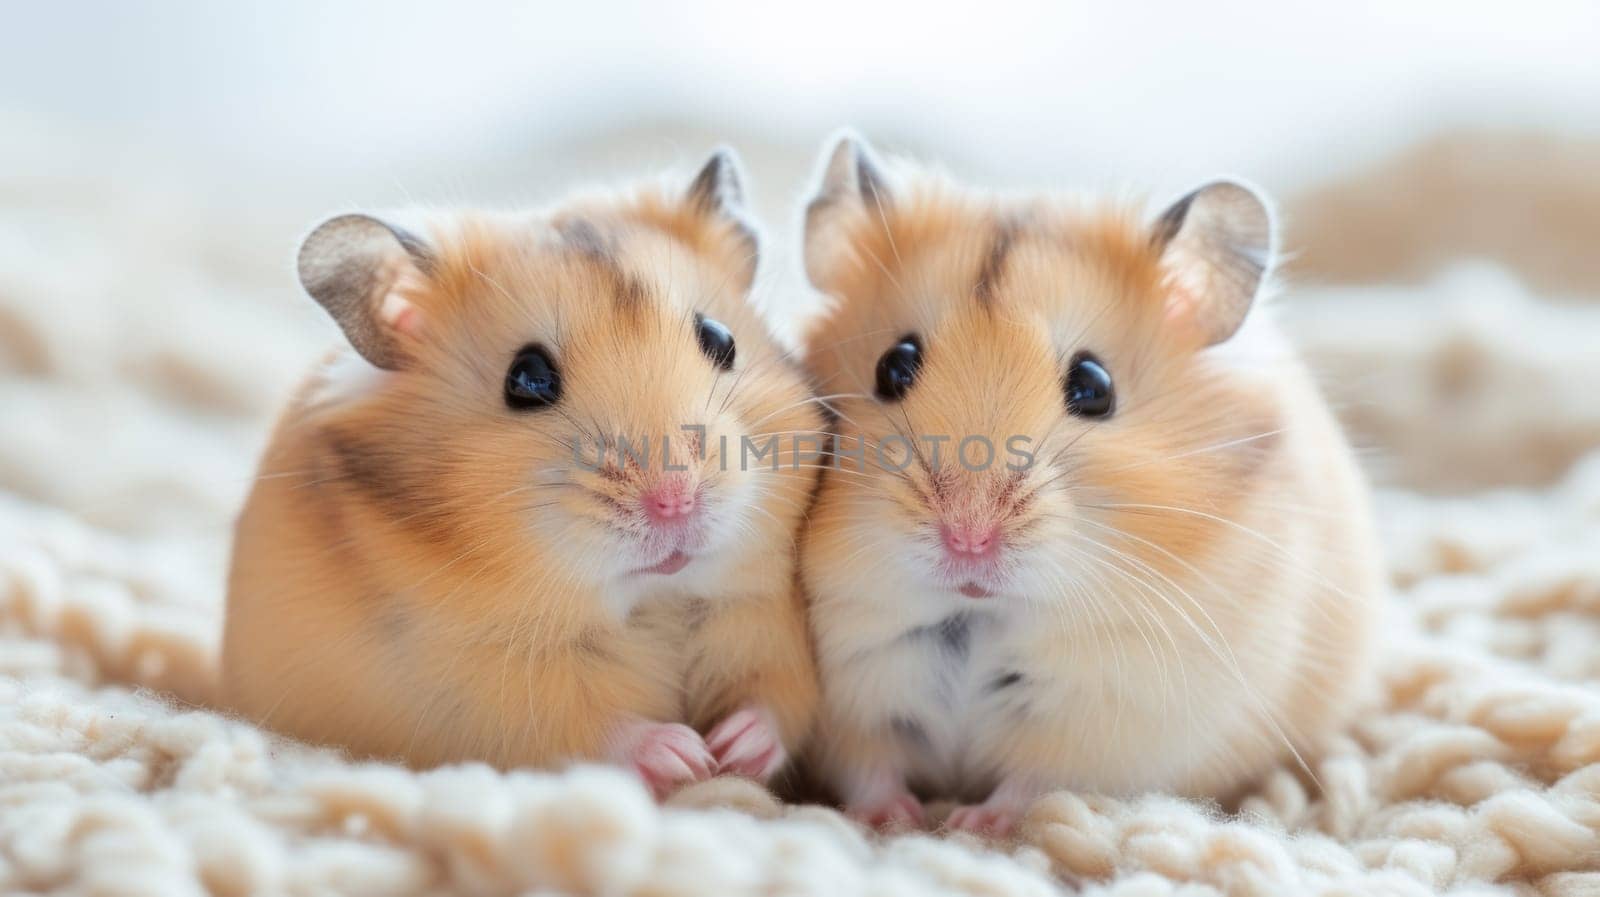 Two small brown and white hamsters sitting on a blanket